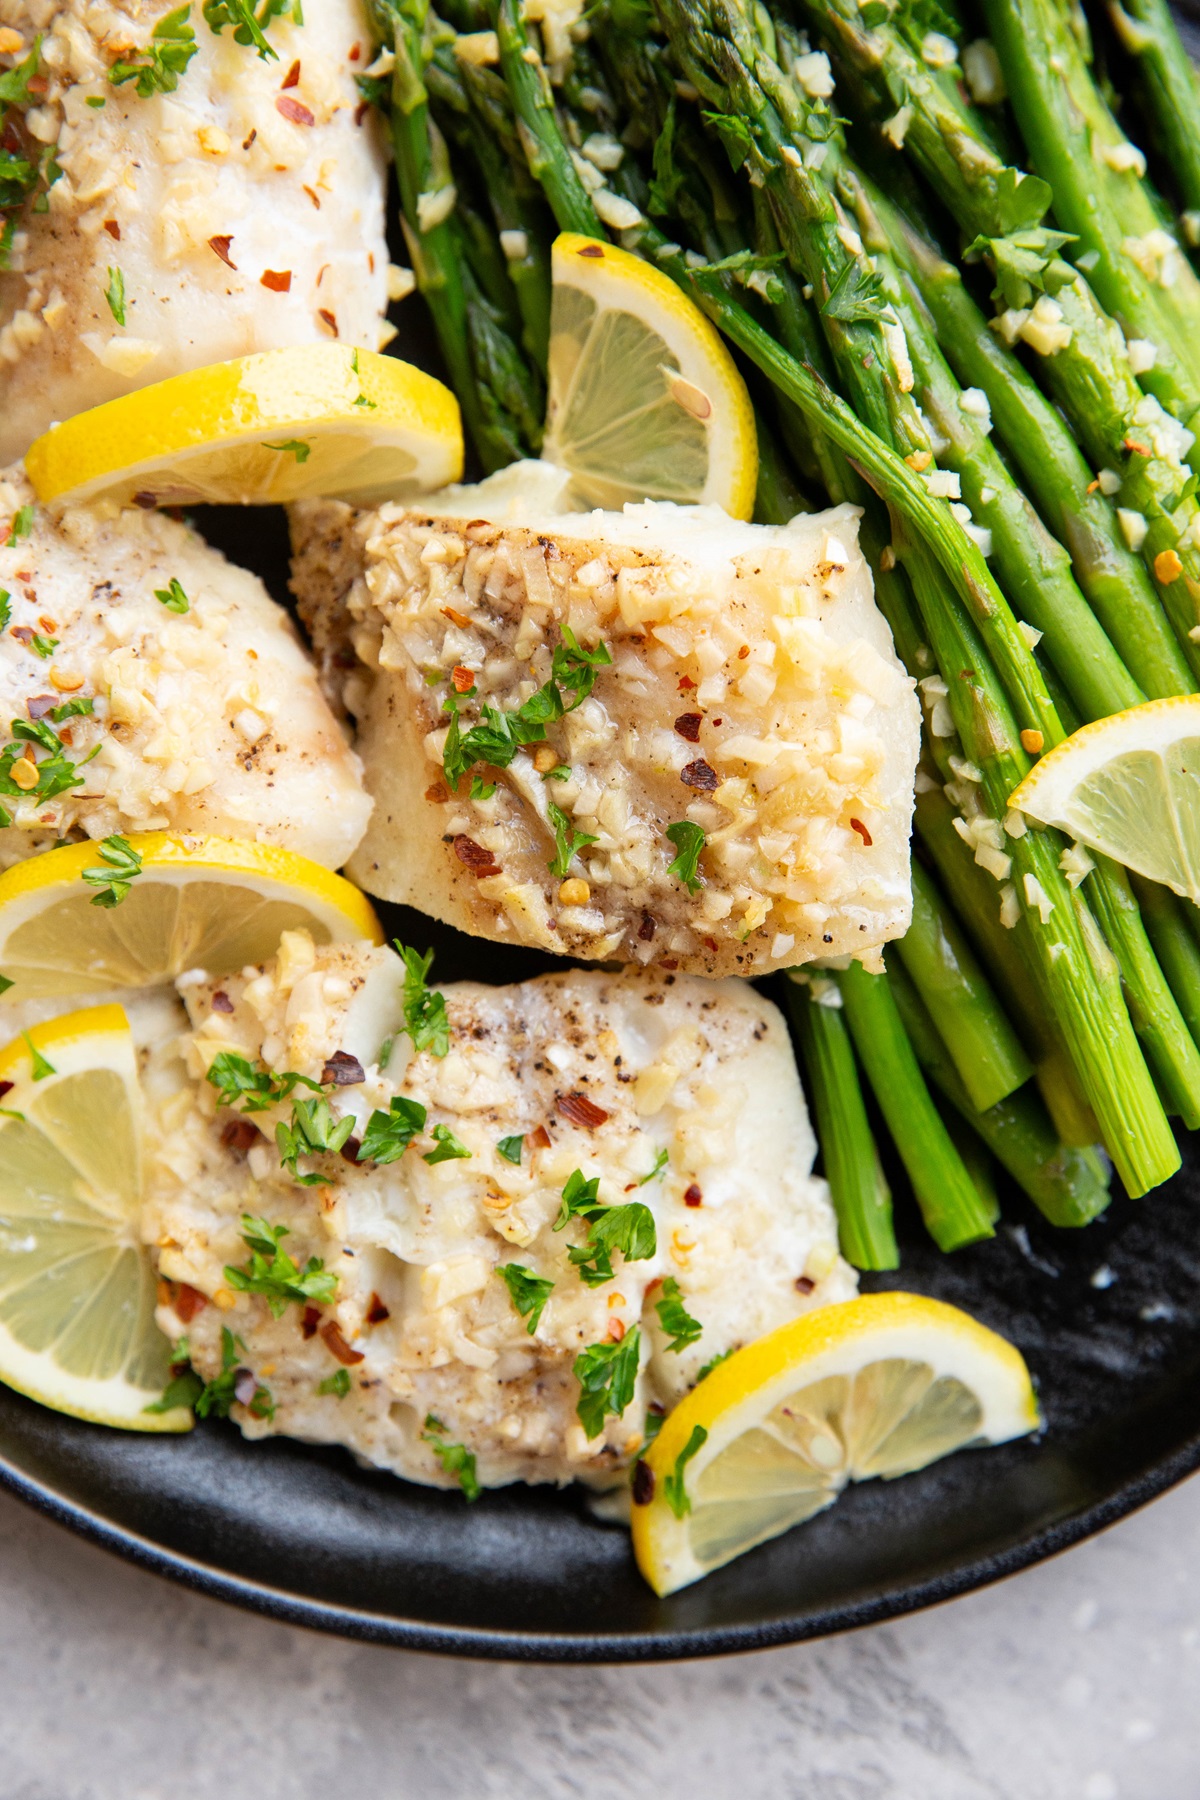 Four baked cod filets on a black plate with baked asparagus and lemon wedges.